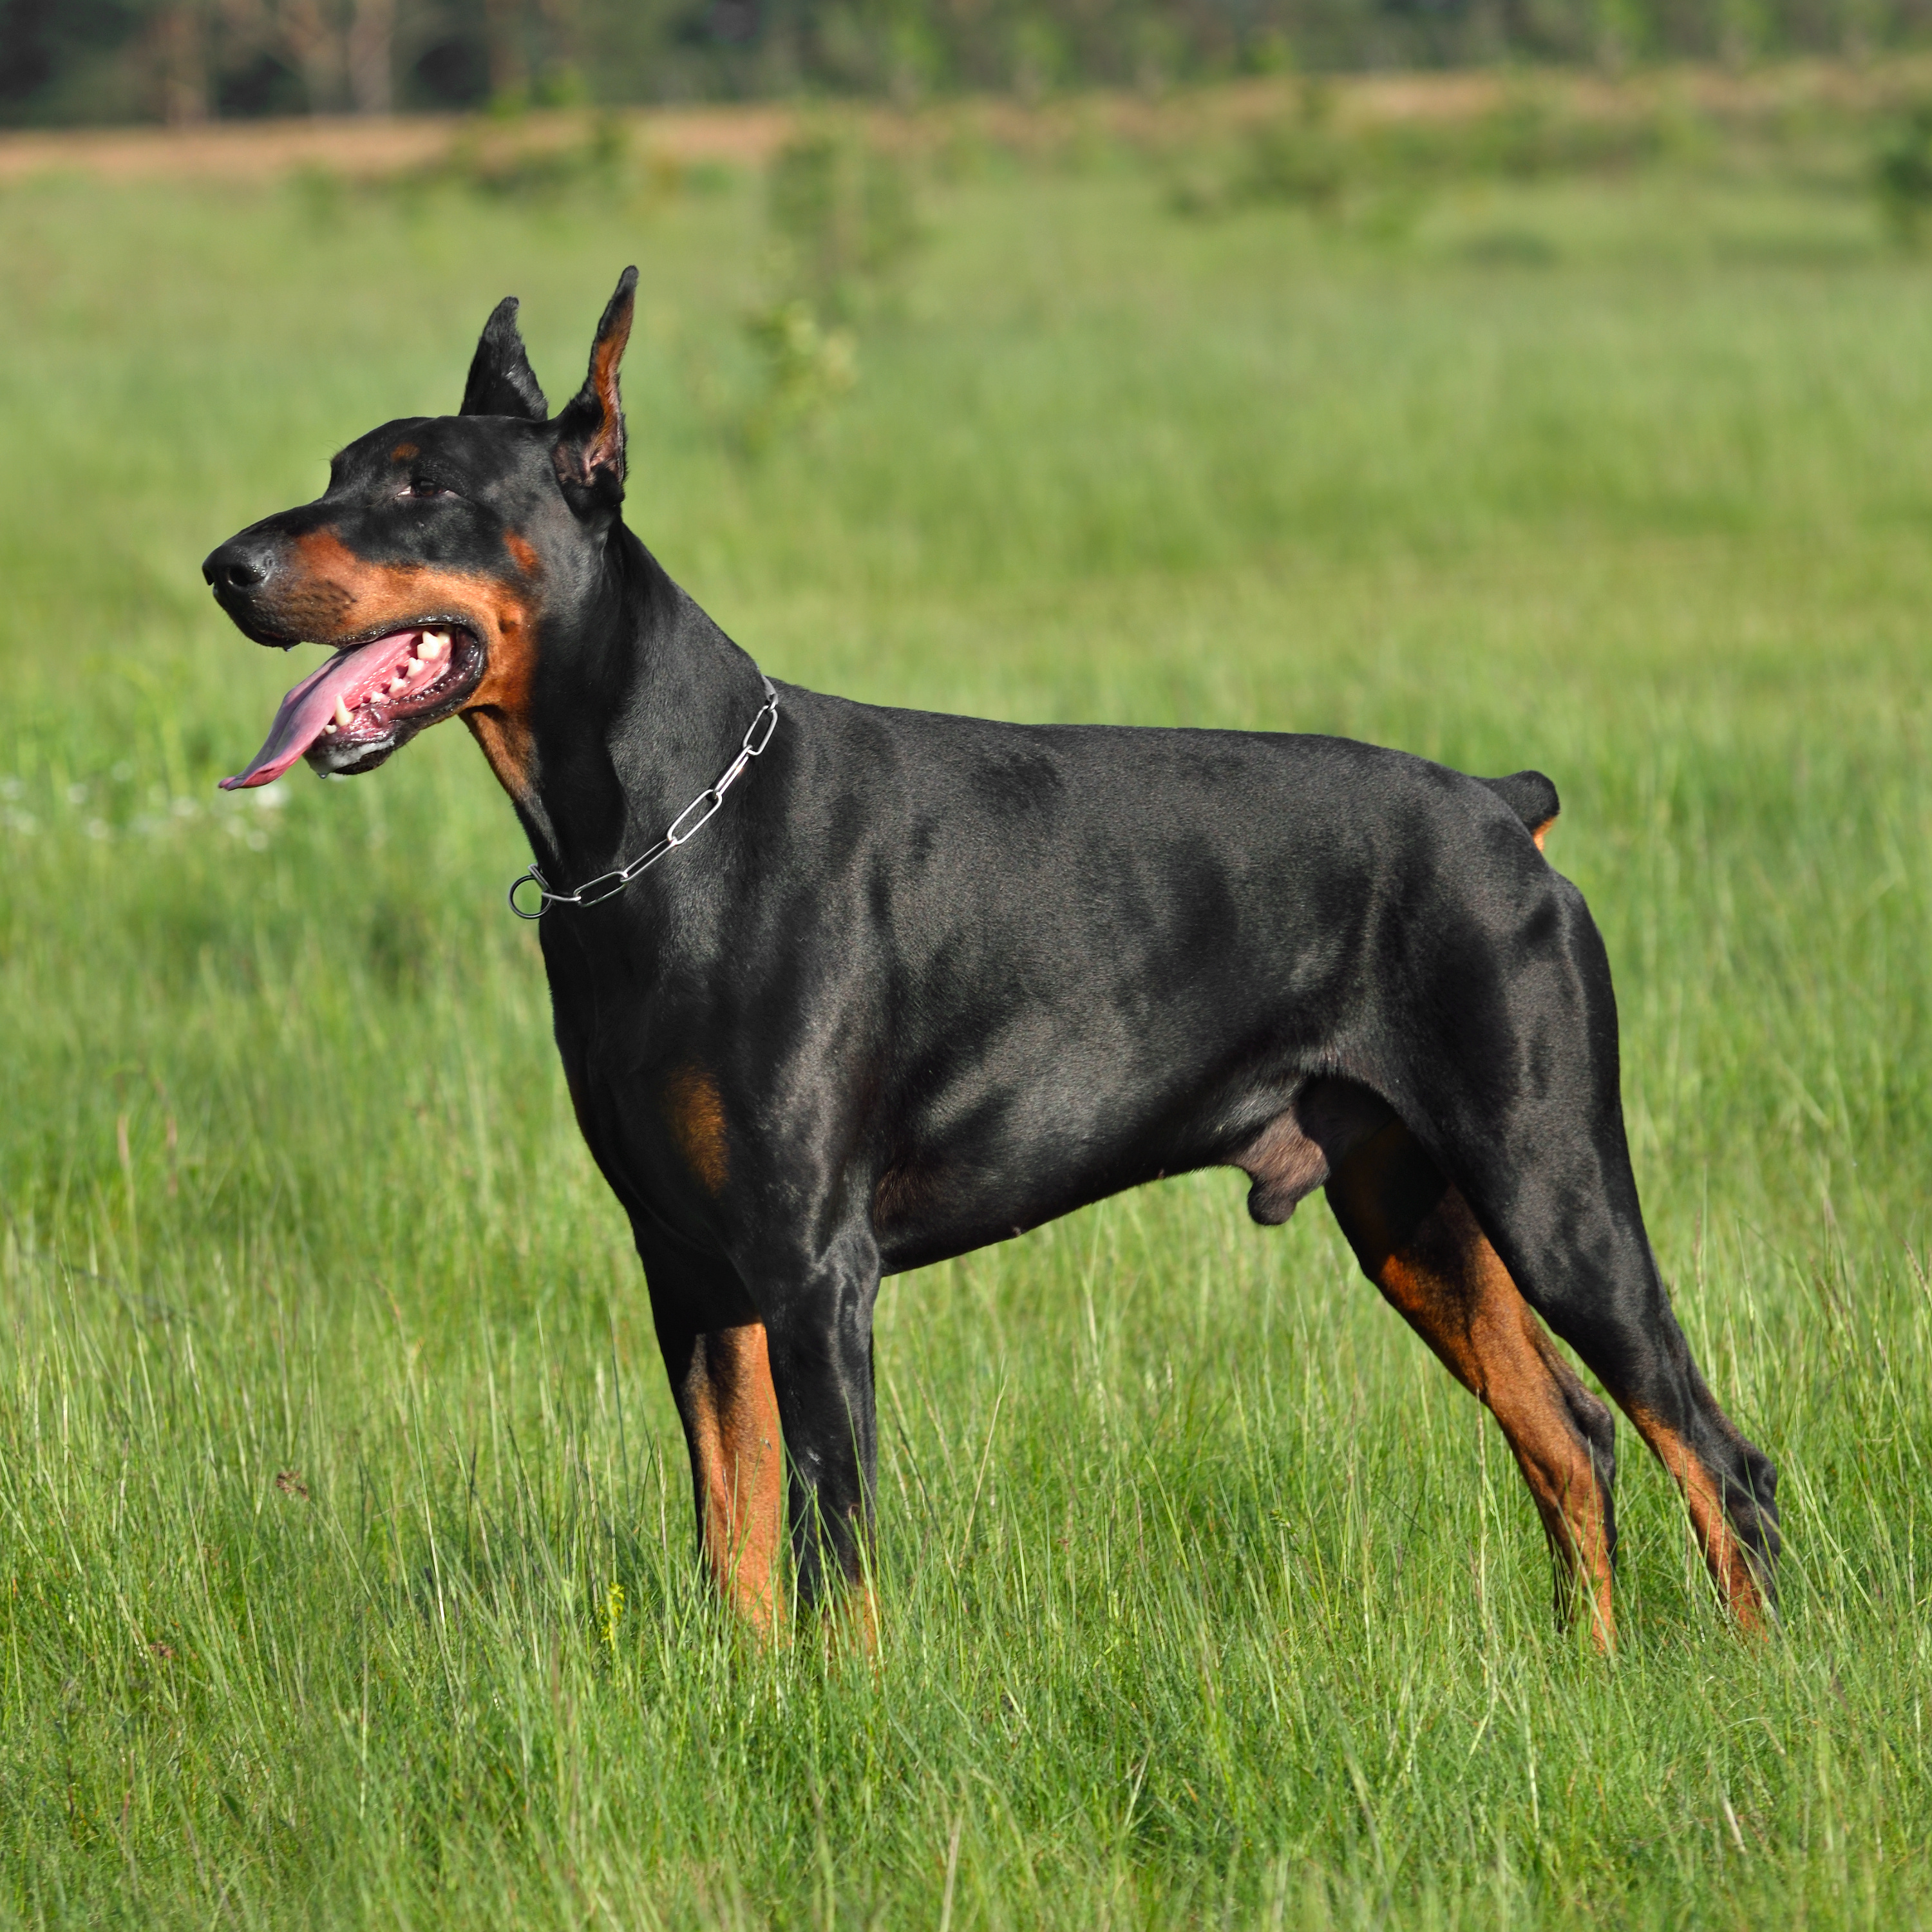 Dog Training Elite has expert Doberman training in Pensacola, FL
																															 that are experienced in a variety of positive training methods for Dobermans.